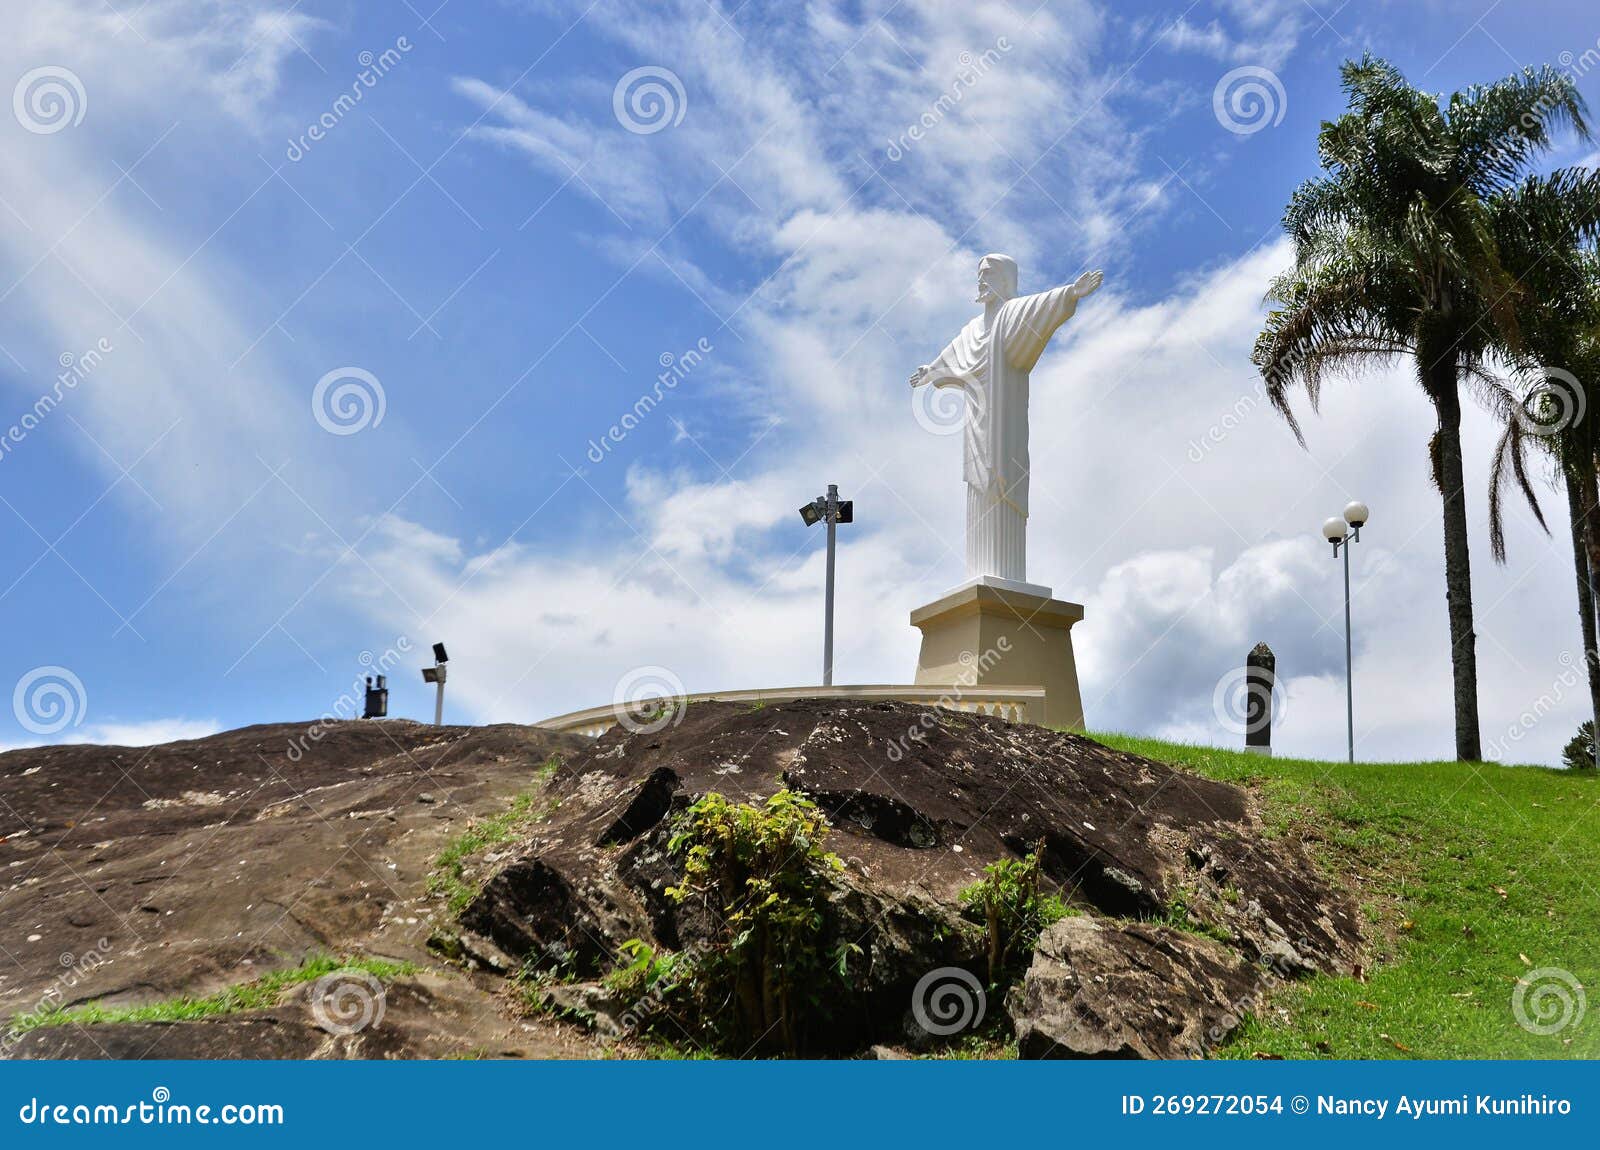 Christ redeemer route complete guide visit agency travel hike restoration wait buy top explore way choose hiking